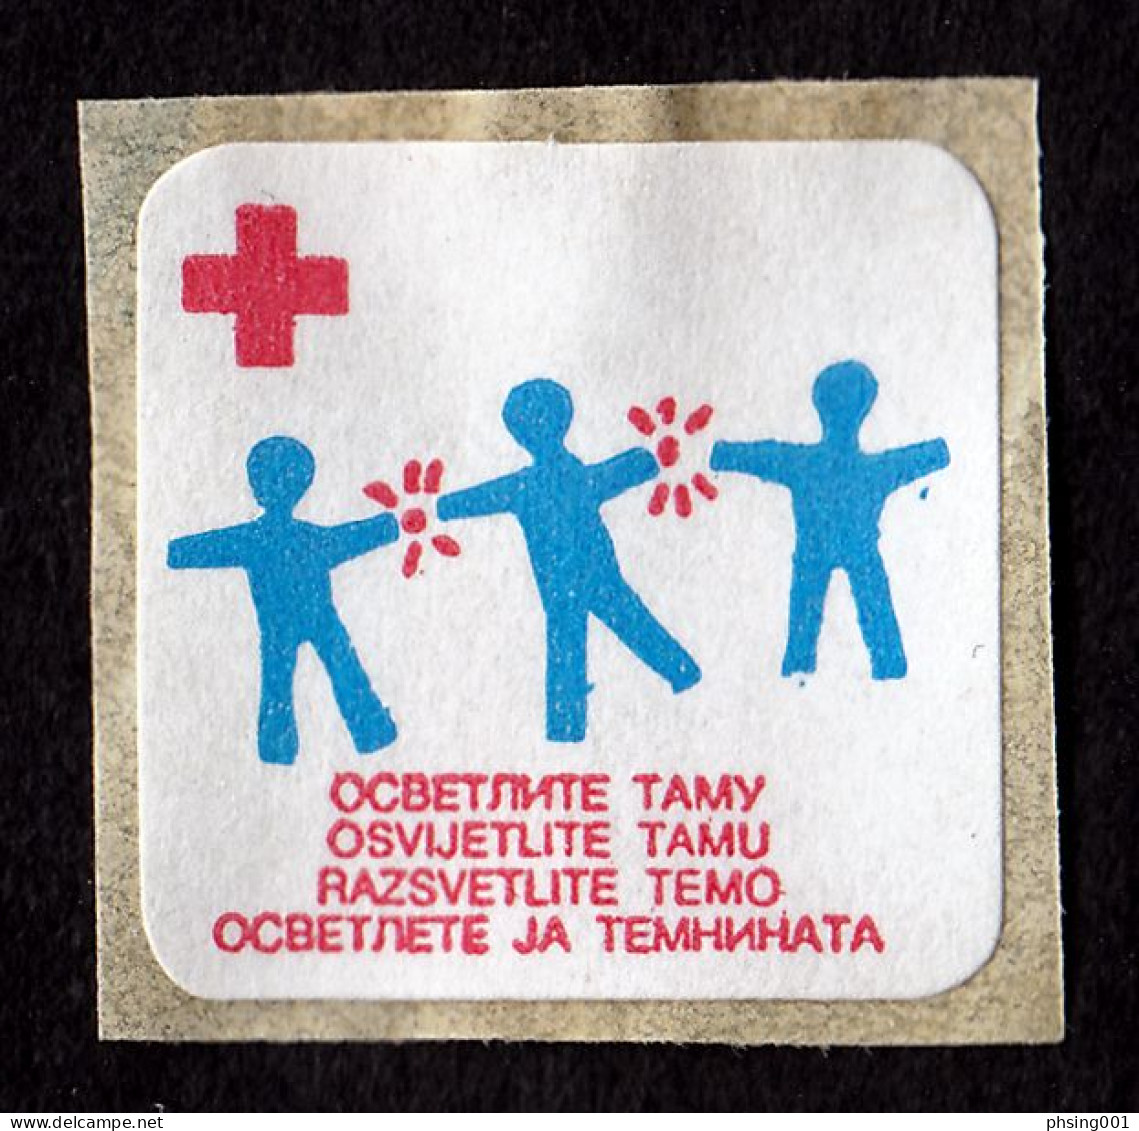 Yugoslavia 1991 Red Cross Croix Rouge Rotes Kreuz Tax Charity Surcharge Self Adhesive Stamp MNH - Portomarken